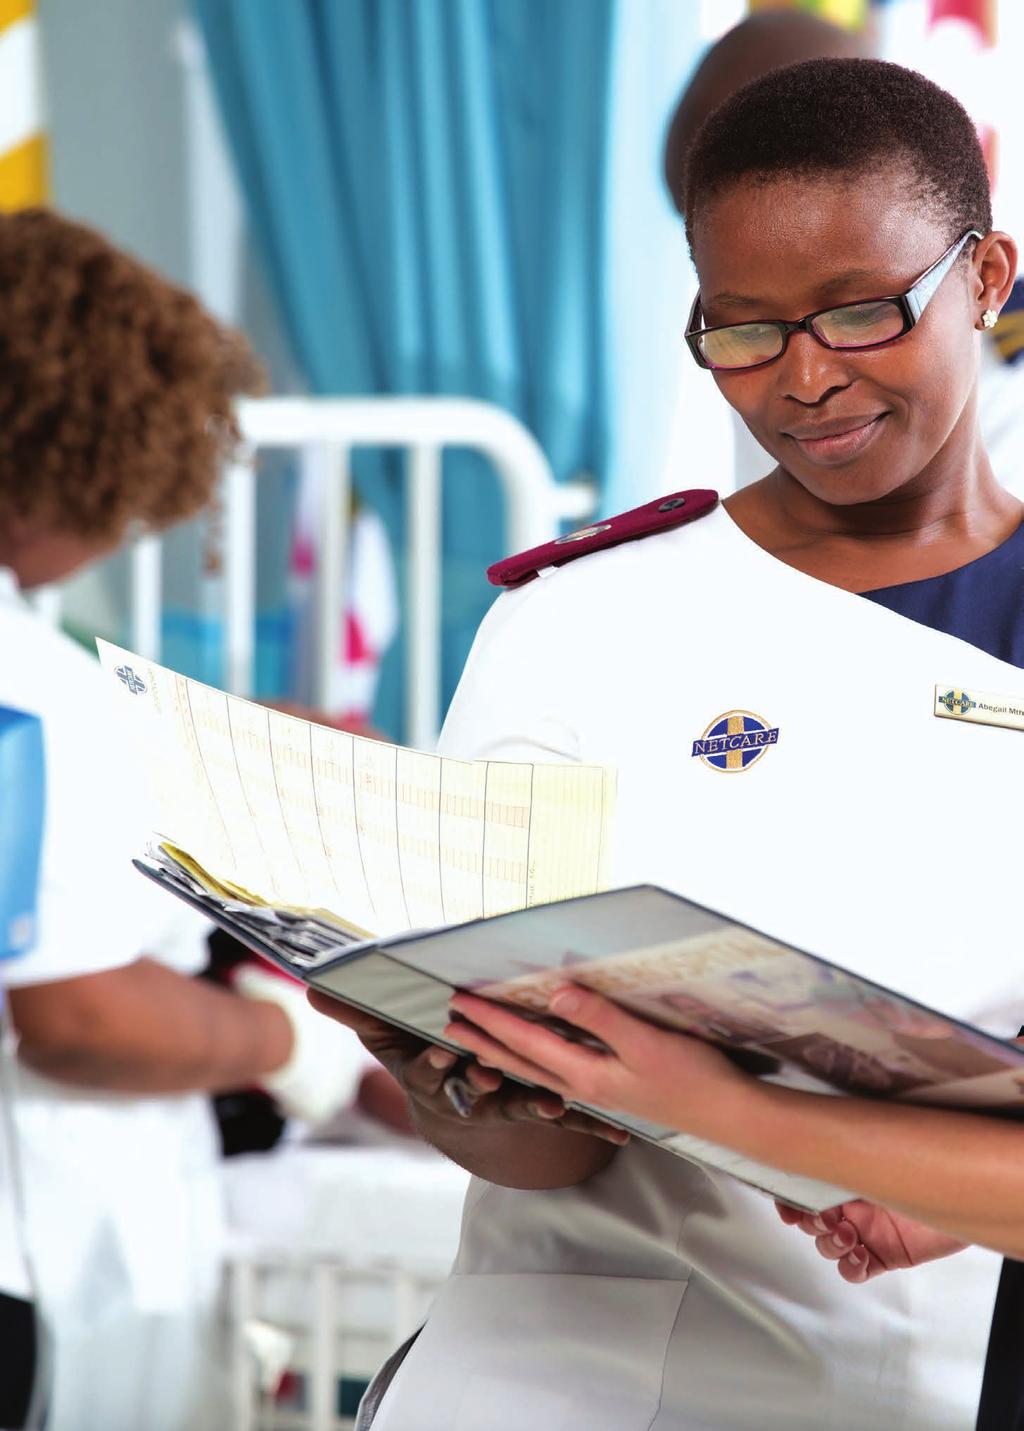 Annual integrated report 20 64 Ensuring quality outcomes Over the past five years we have built an integrated quality management system that drives quality improvement across all Netcare divisions.